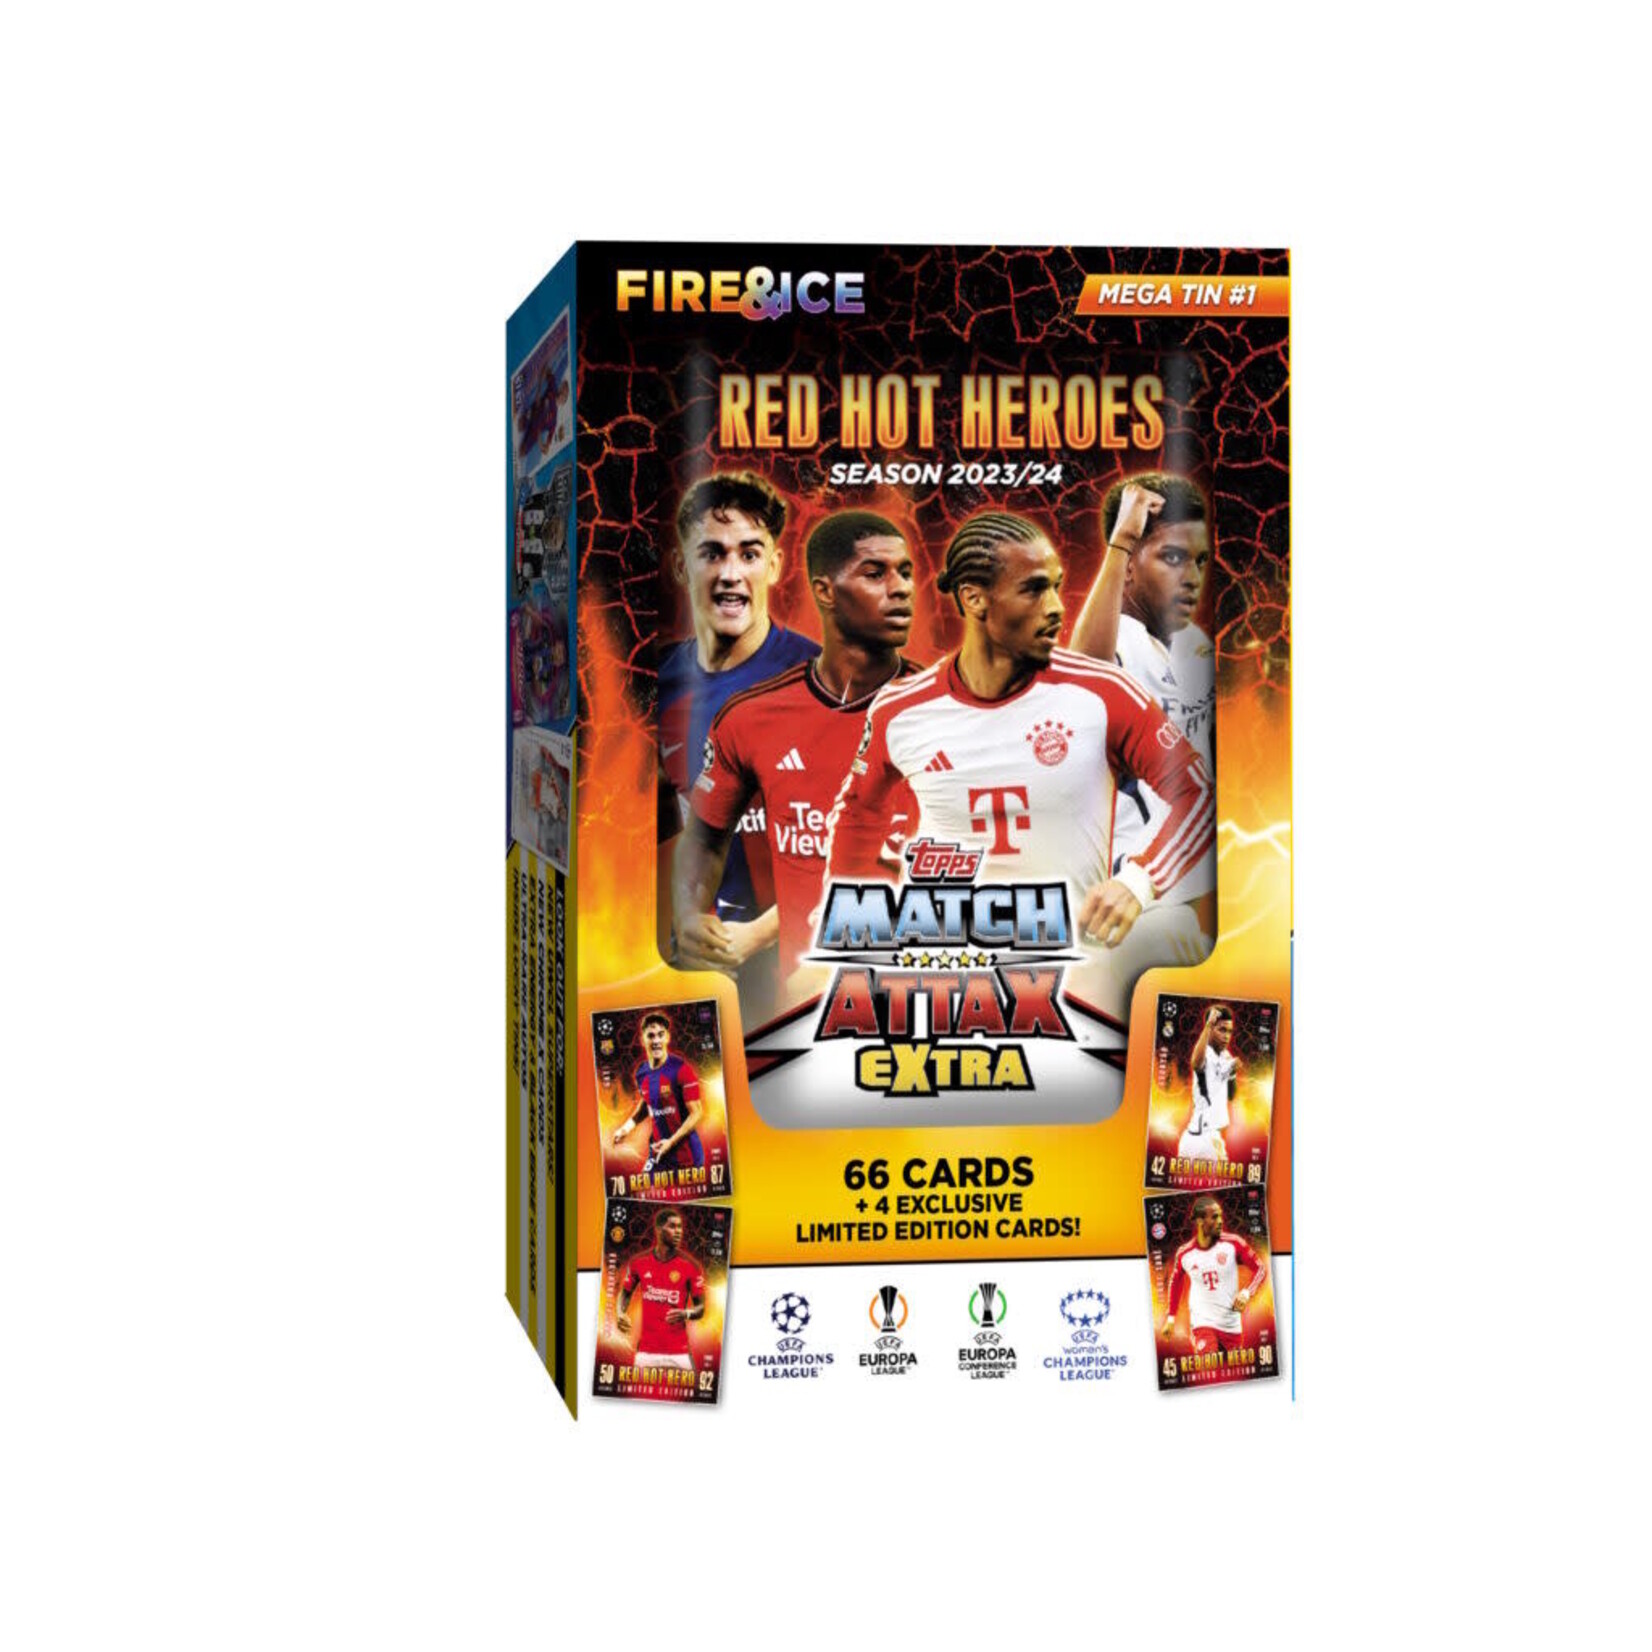 Topps 2023-24 TOPPS MATCH ATTAX EXTRA UEFA CHAMPIONS LEAGUE CARDS – MEGA TIN (66 CARDS + 4 LE) (CASE PACK OF 6)